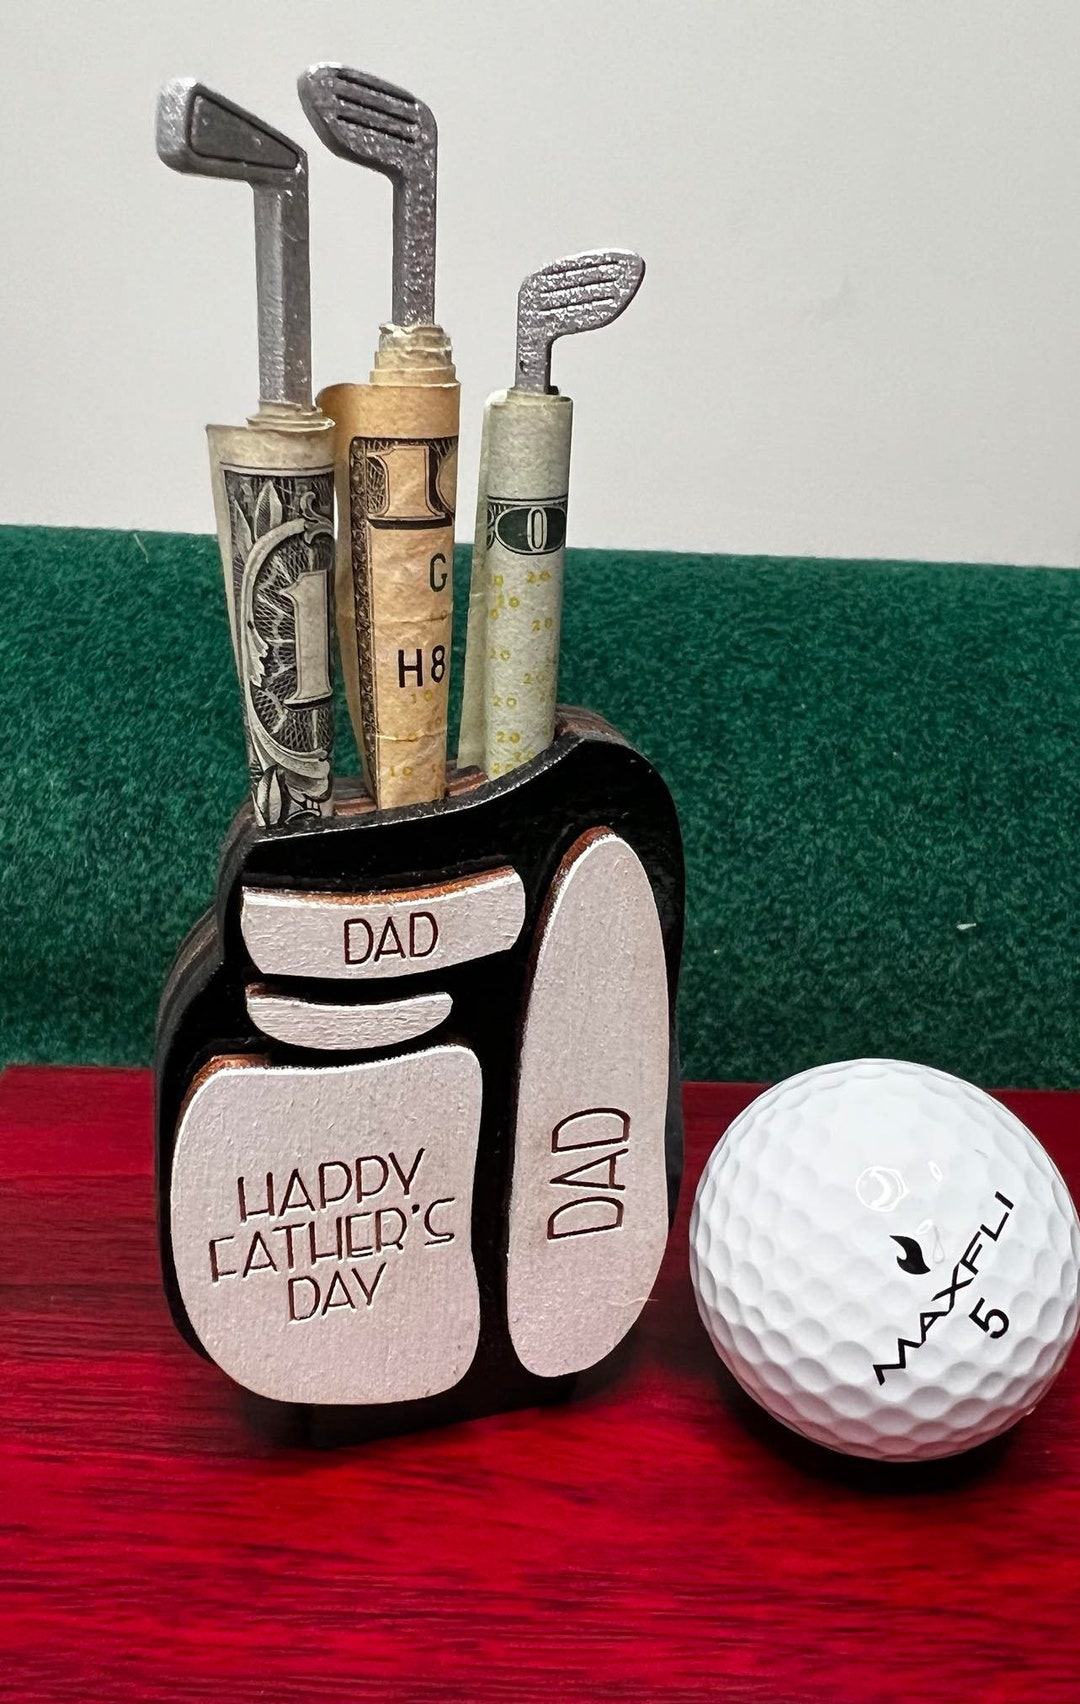 Golf Gifts for Men, Golf Gift for Dad, Fathers Day Gift, Golfer Gift, Happy  Fathers Day, Dad Gift, Gift for Golf, Personalized Gold Gift 